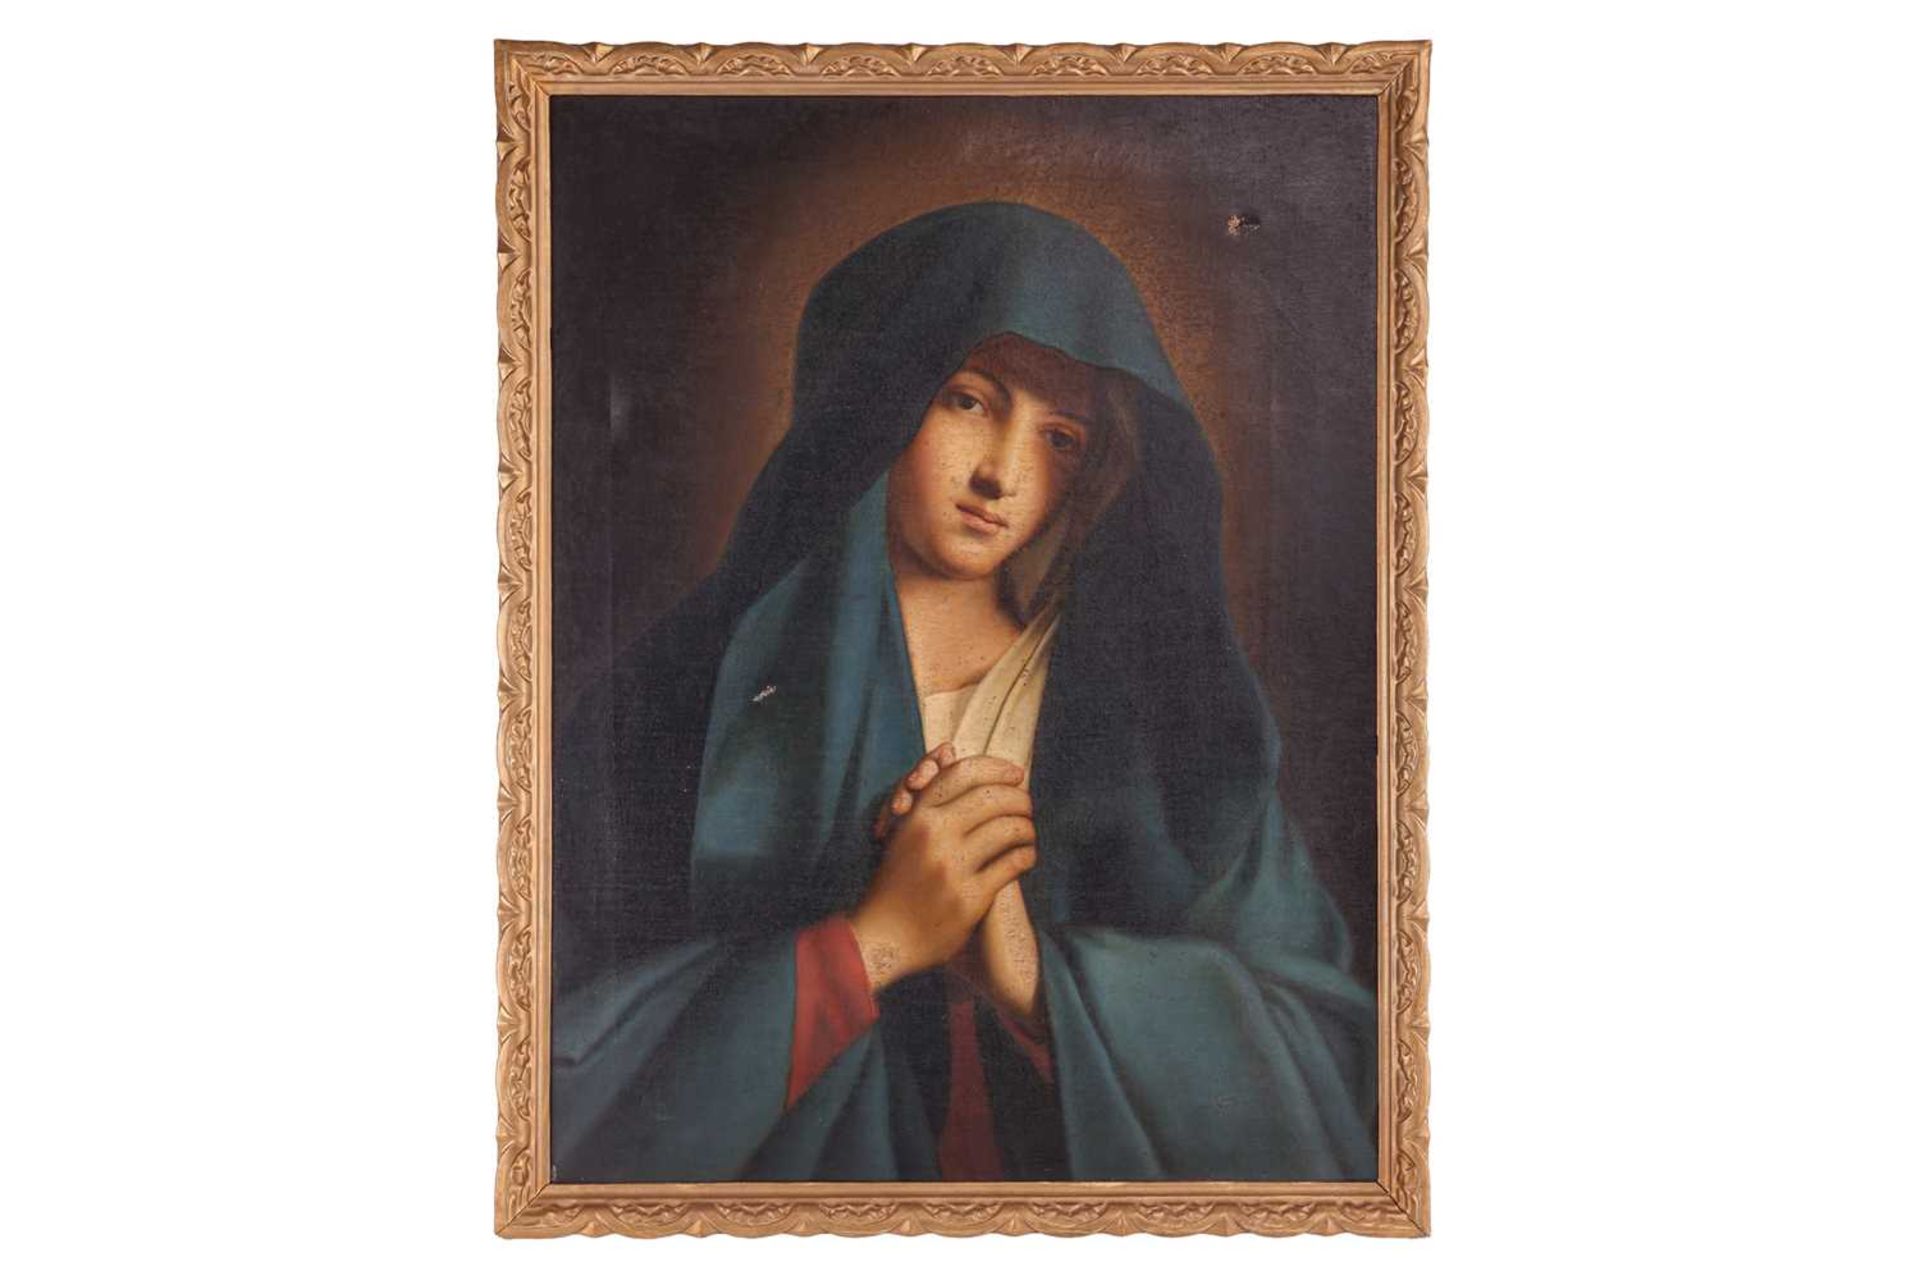 T. Berti of Florence (Italian 19th century), Madonna in Prayer (After Carlo Dolci), inscribed verso,